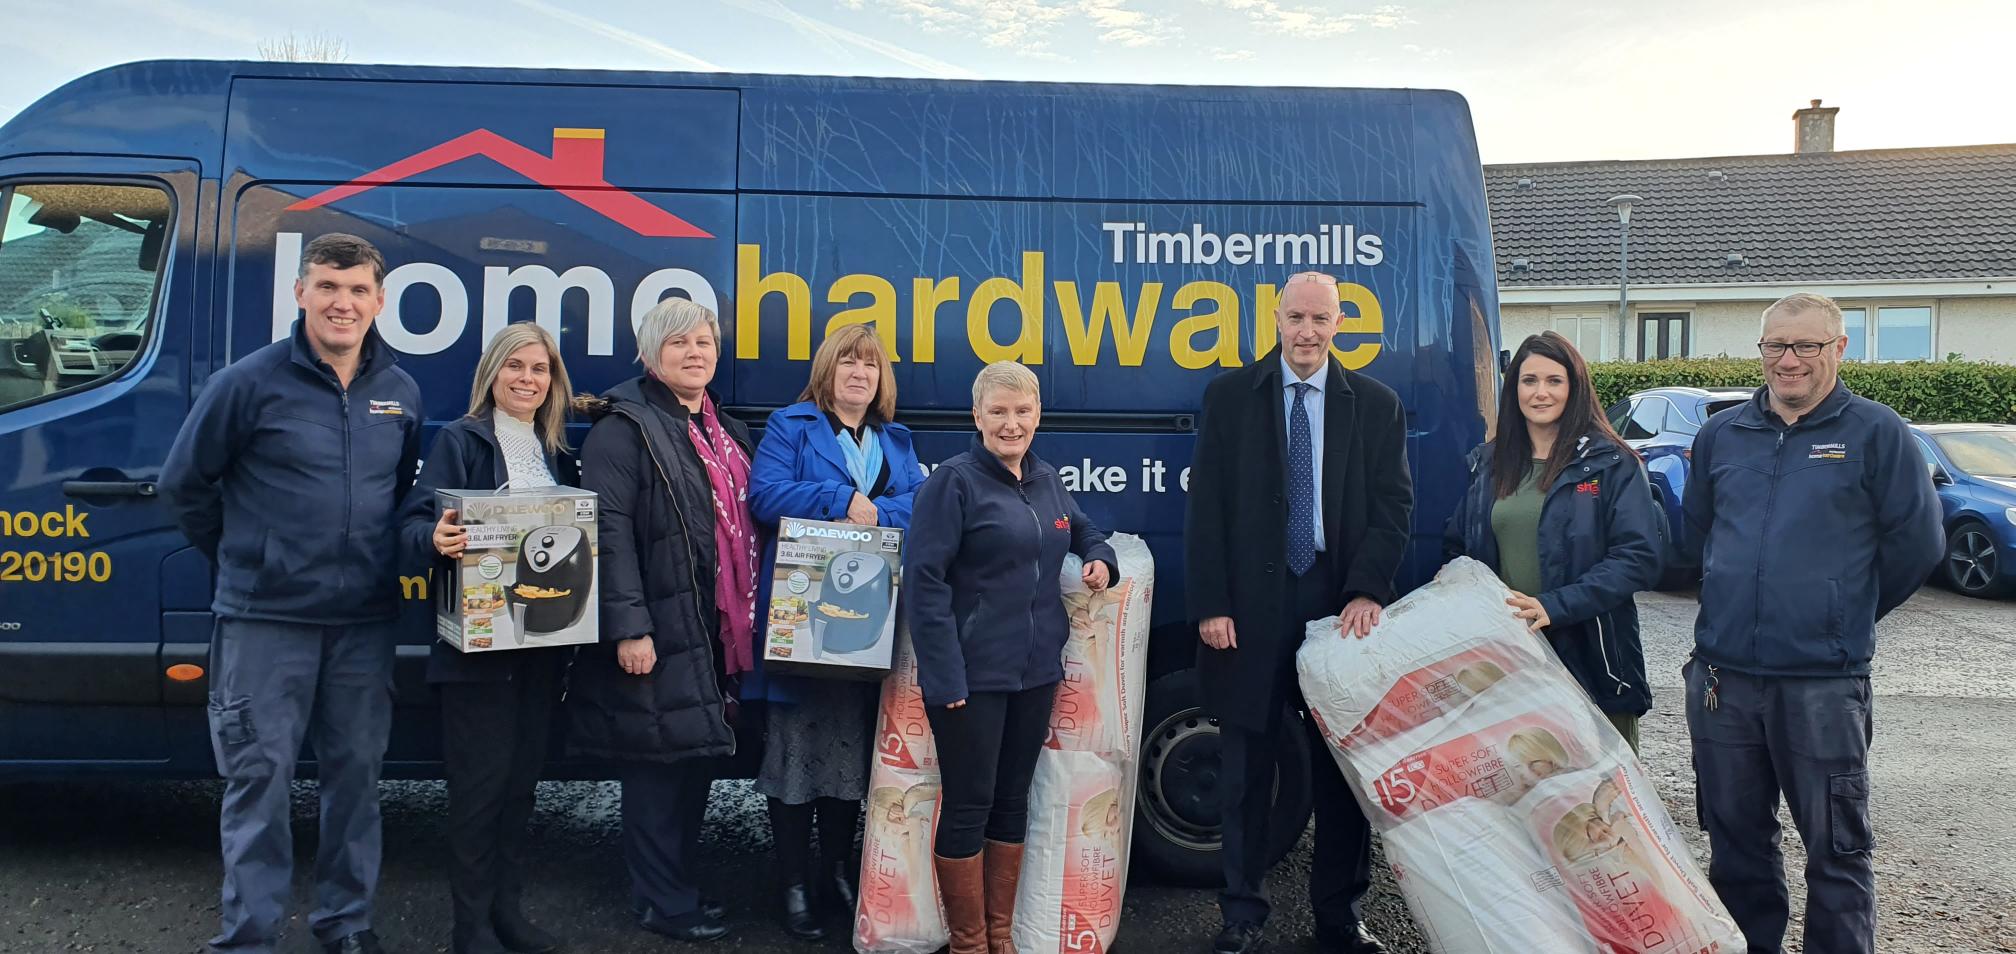 Shire Housing Association helps tenants stay warm this winter